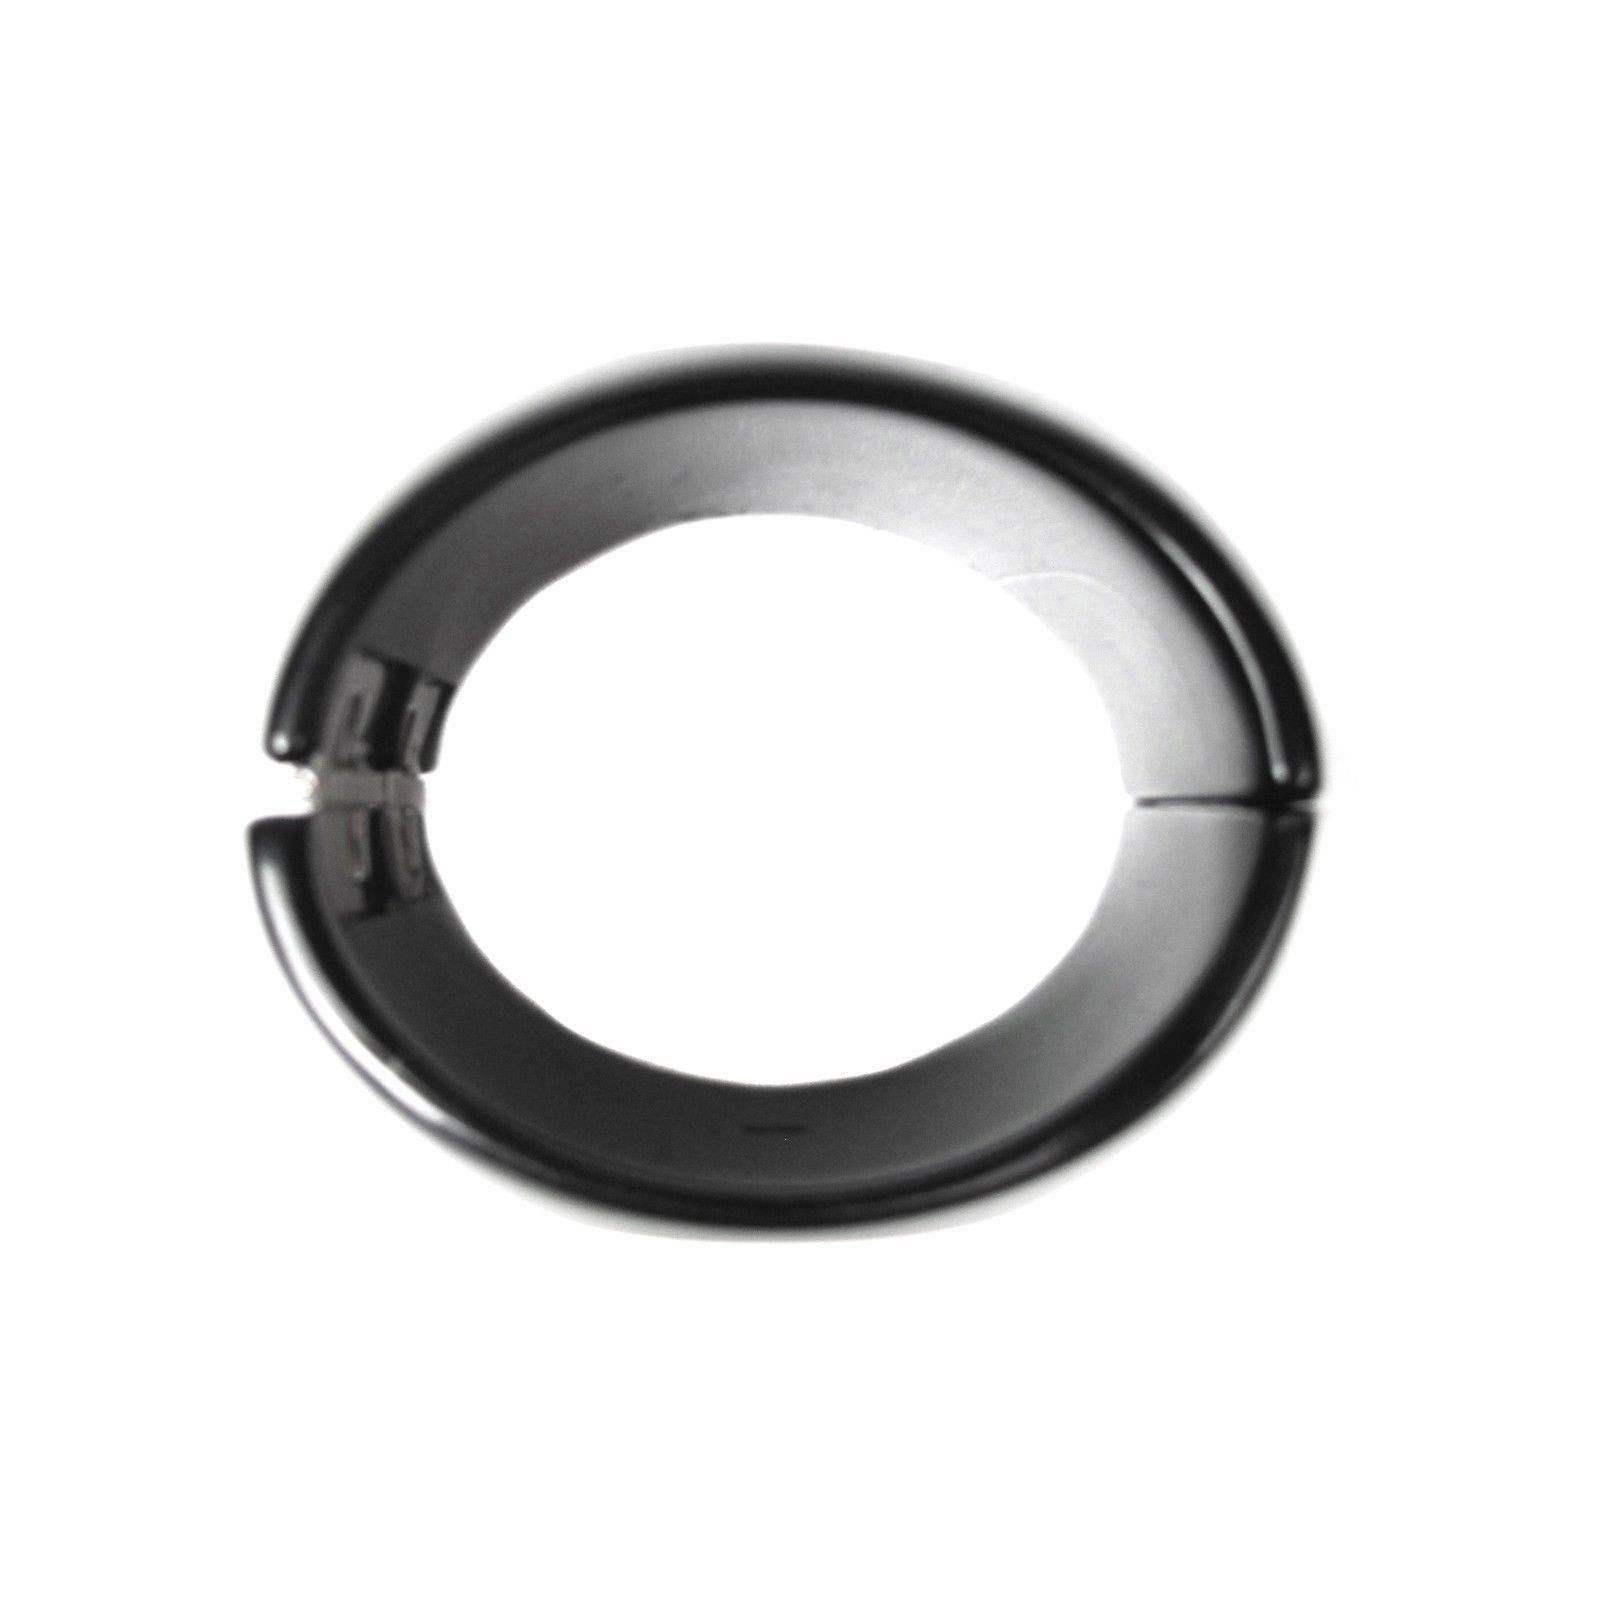 Chanel - Record Cuff Bracelet

RARE COLLECTORS ITEM!

Color: Black & White

------------------------------------------------------------
 
Details:

- CC record on BOTH FRONT & BACK

- spring closure

- silver tone hardware

-